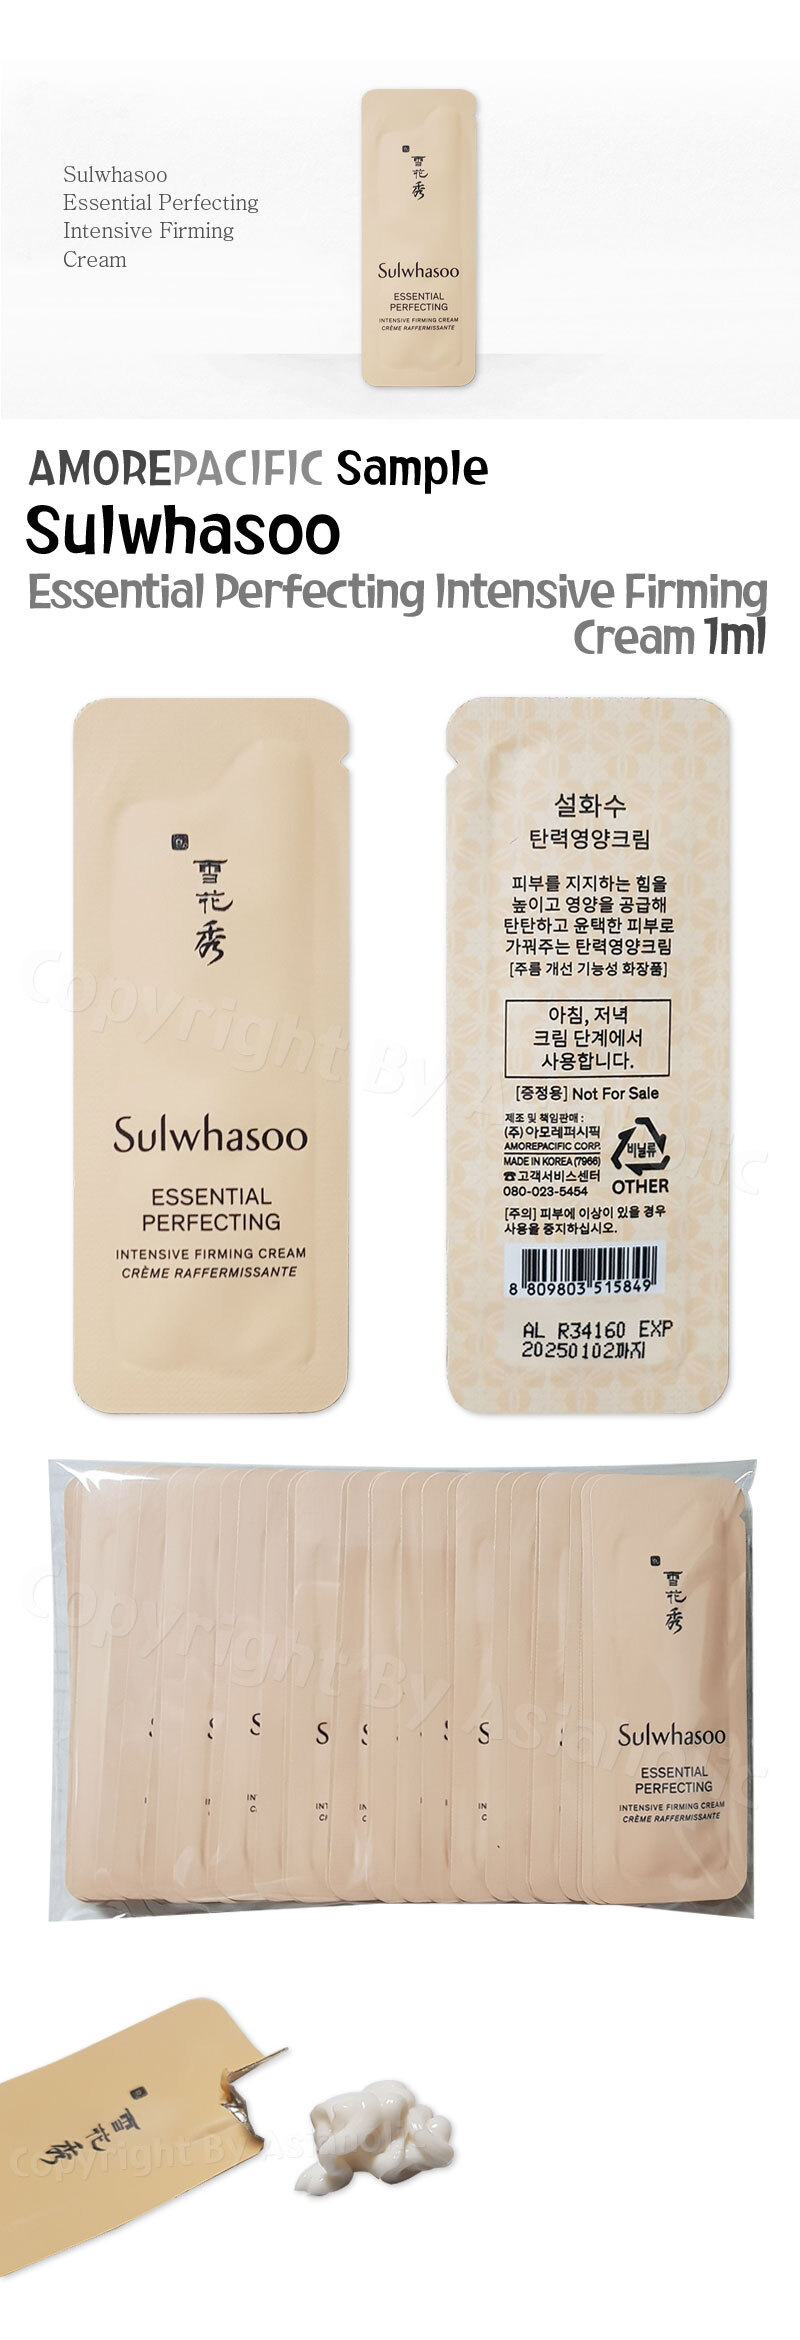 Sulwhasoo Essential Perfecting Intensive Firming Cream 1ml x 10pcs (10ml) Newest Version